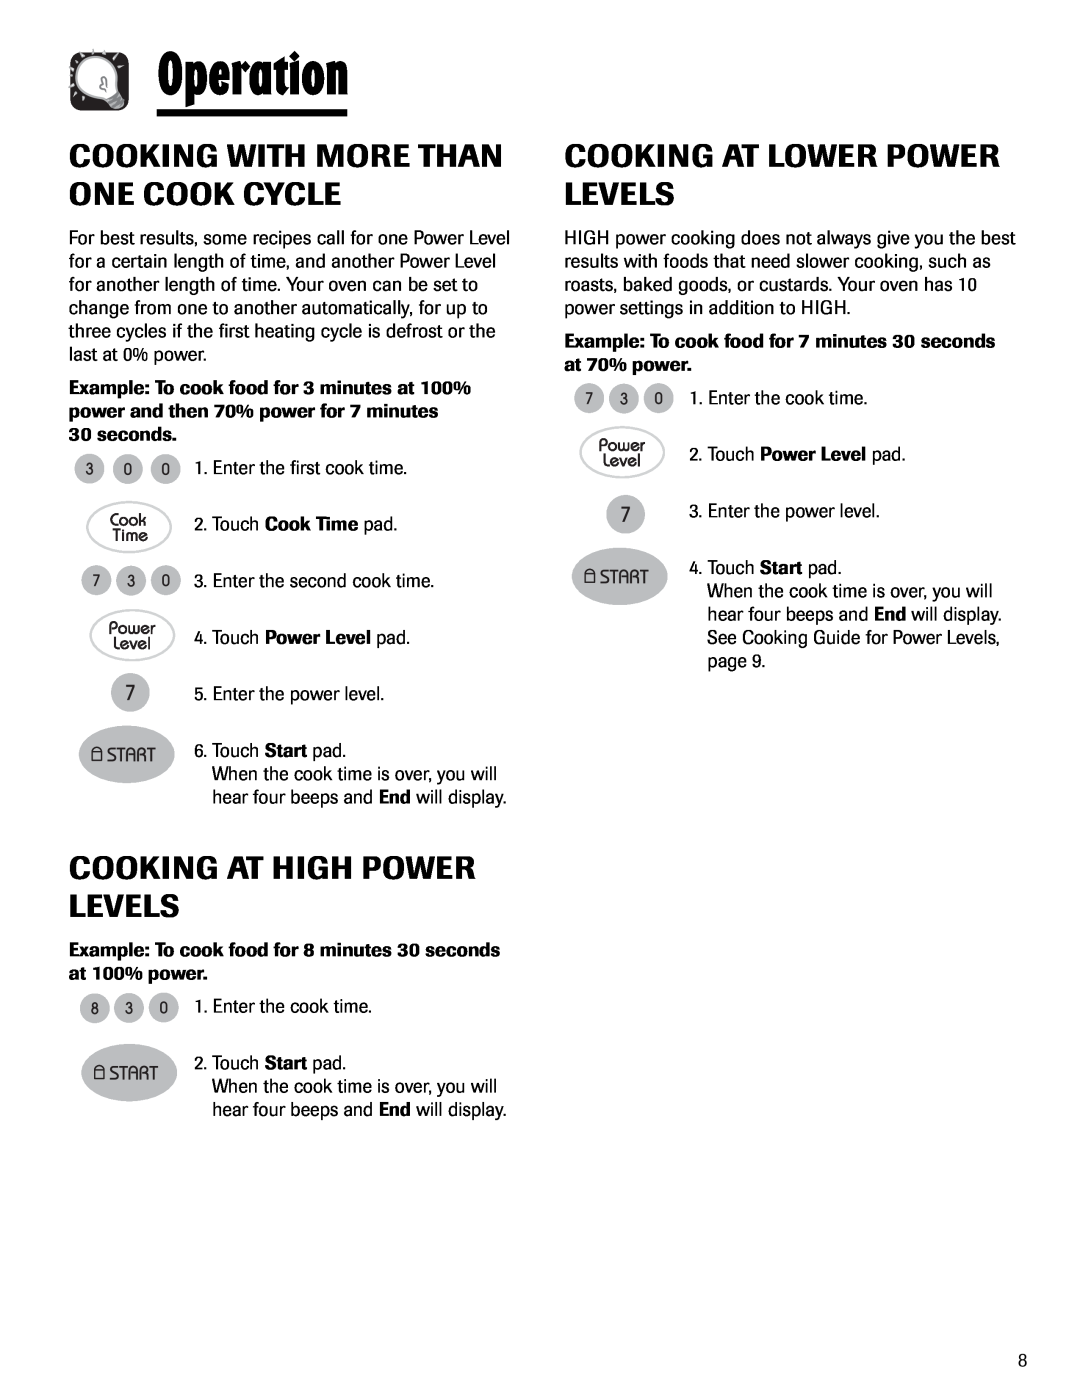 Maytag UMV1152BA Cooking With More Than One Cook Cycle, Cooking At High Power Levels, Cooking At Lower Power Levels 